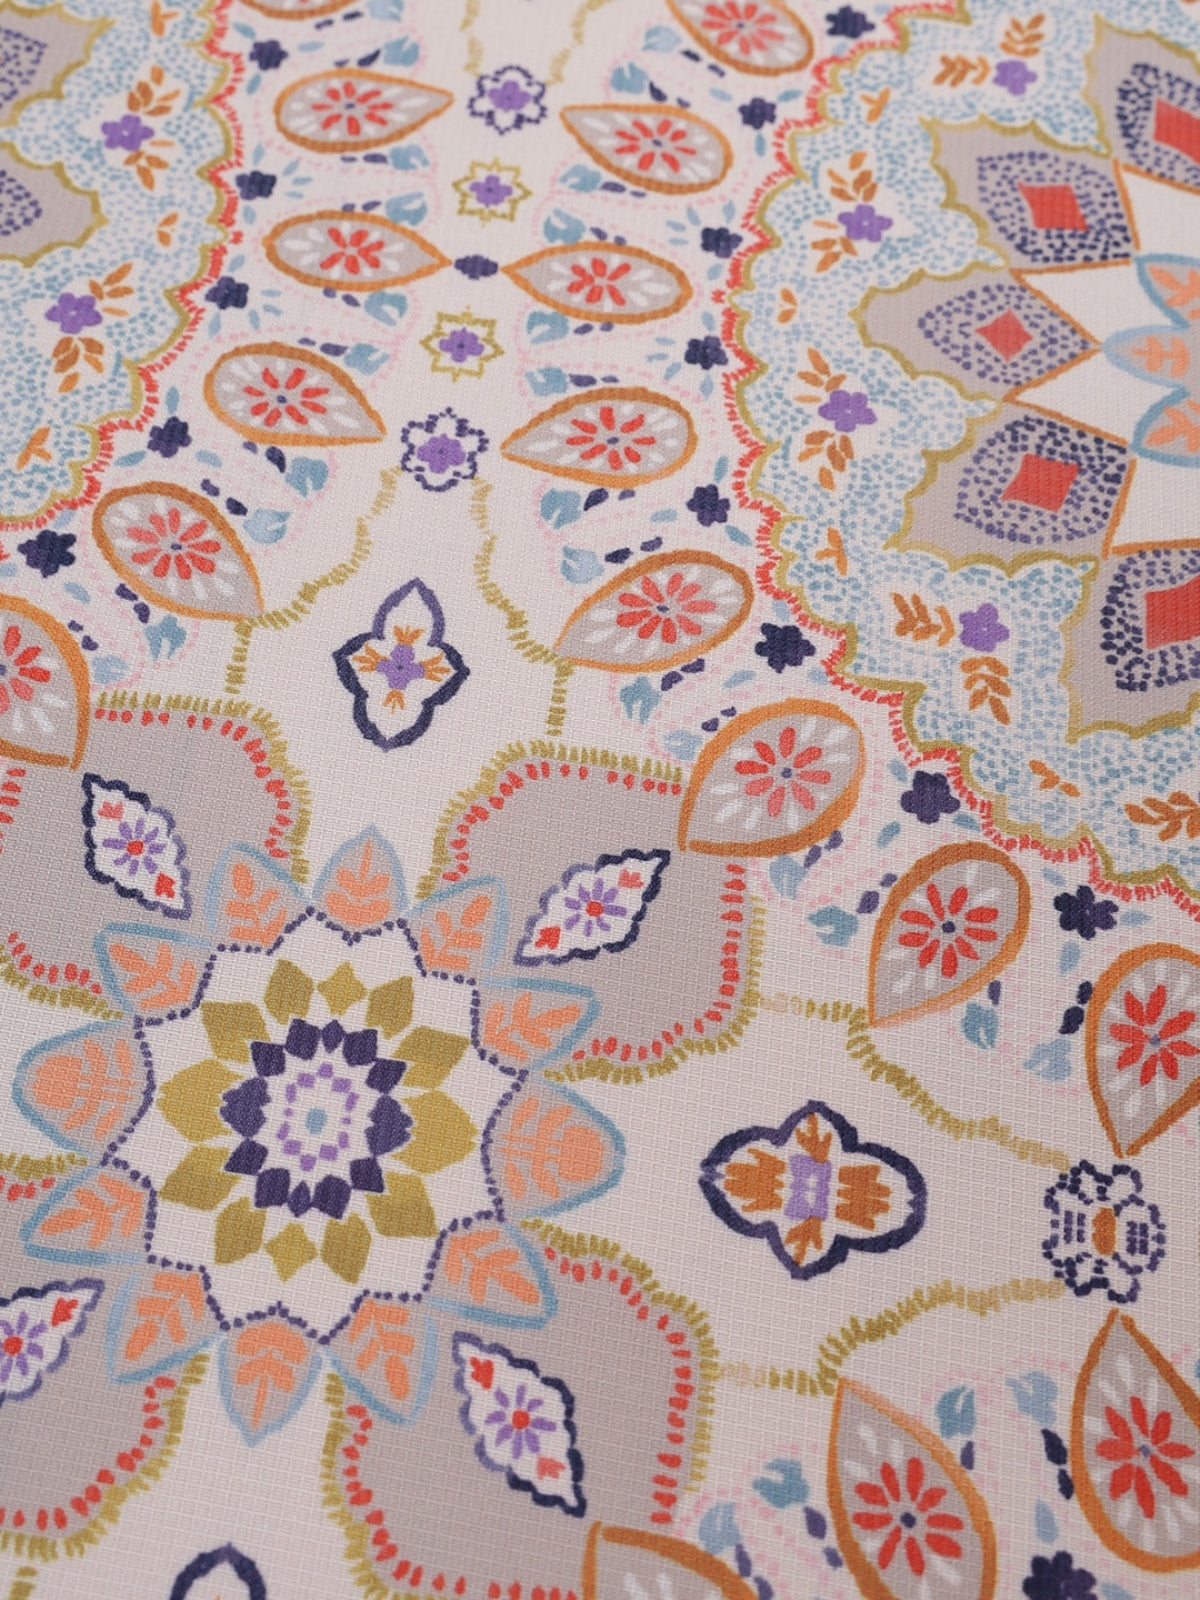 Polyester Mandala Printed Dining Table Cover Cloth 60x90 Inch - Beige